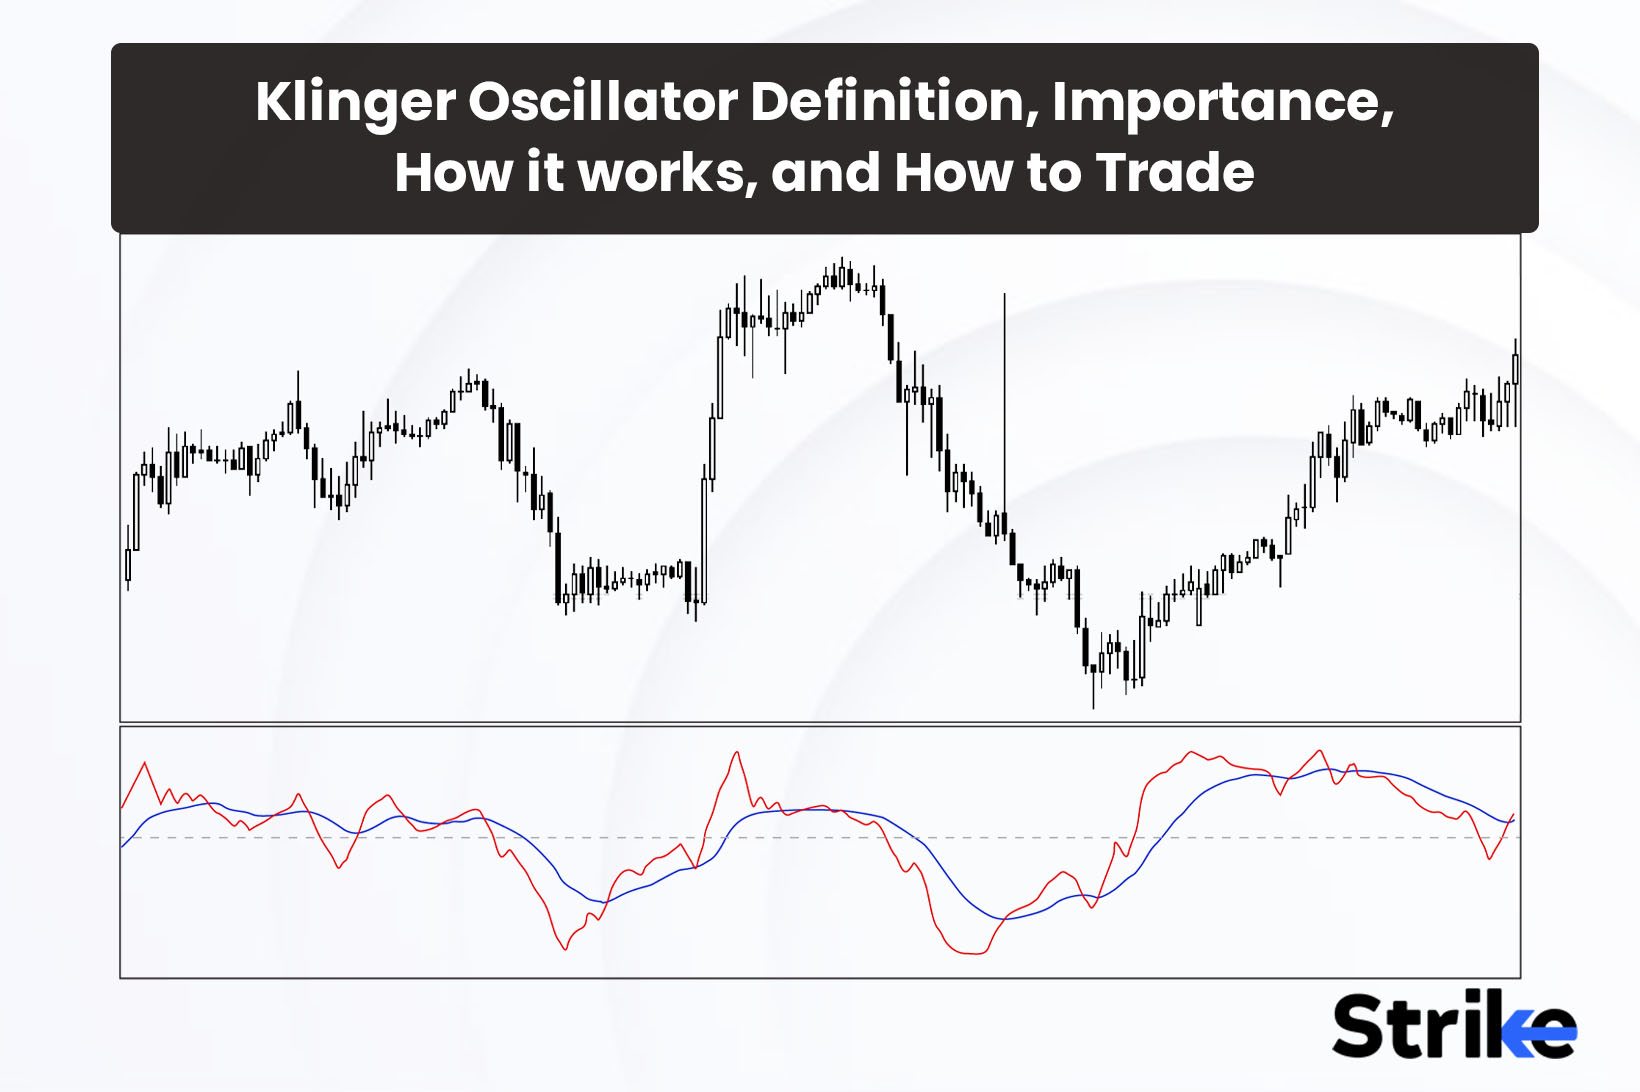 Klinger Oscillator: Definition, Importance, How It Works, and How to Trade